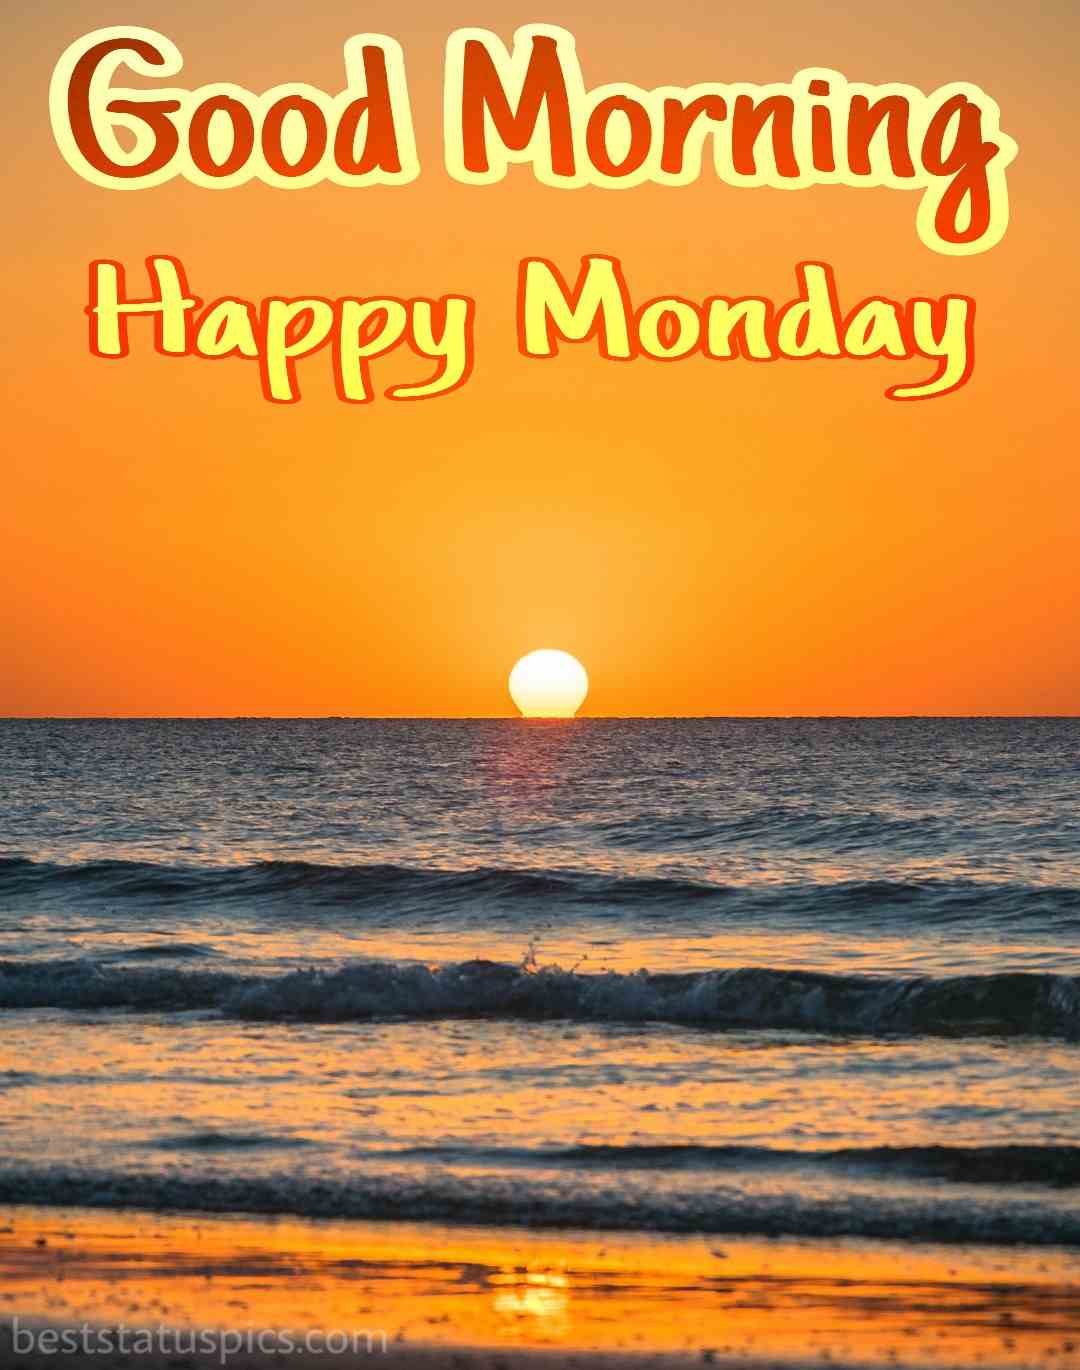 51+ Good Morning Happy Monday Images HD, Quotes [2022] - Best Status Pics